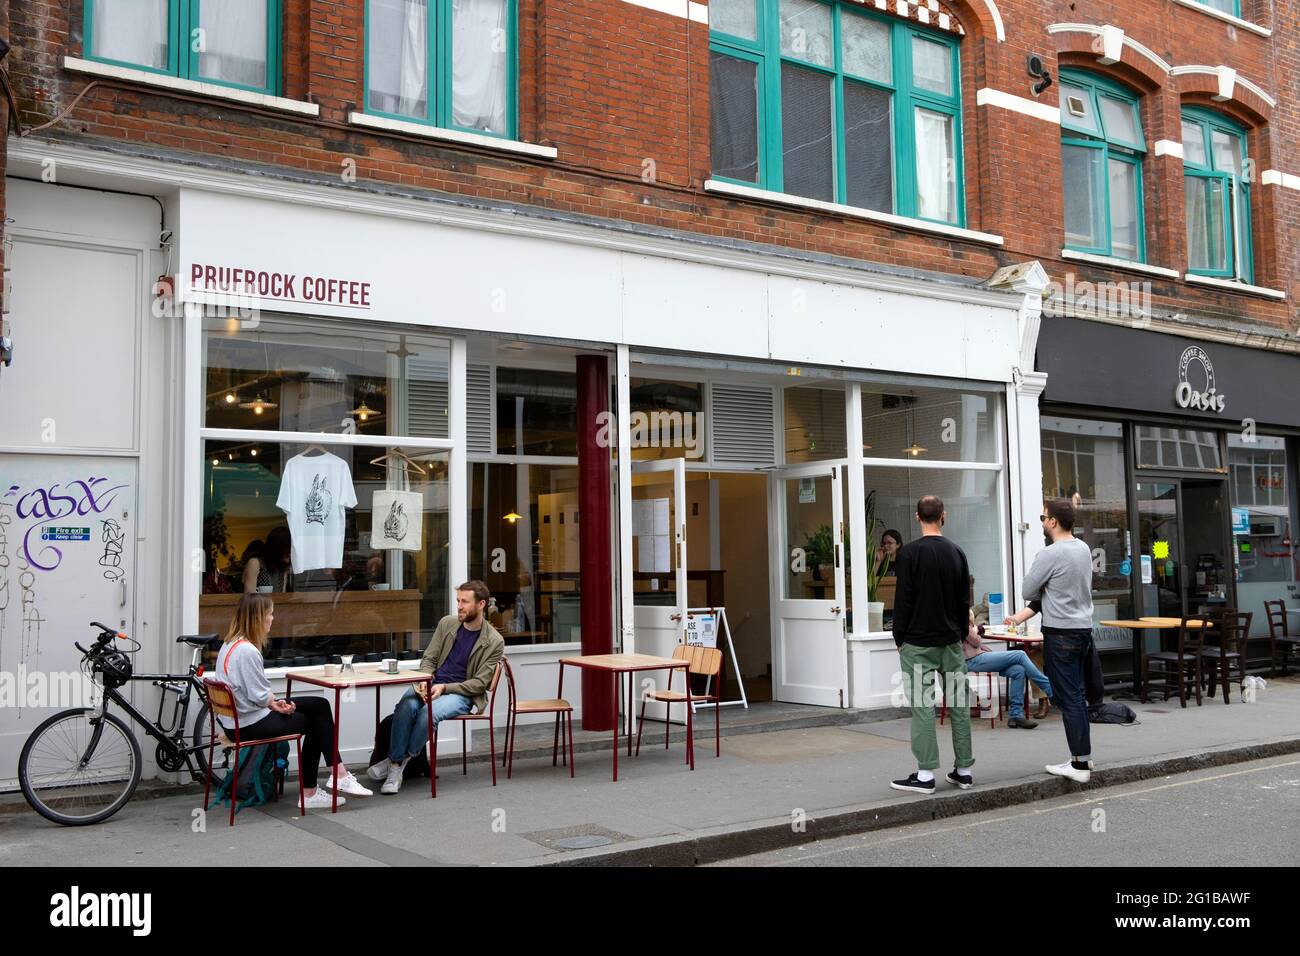 People customers social distancing sitting tables outside Prufrock Coffee  shop during Covid pandemic in Exmouth Market London England UK KATHY DEWITT  Stock Photo - Alamy